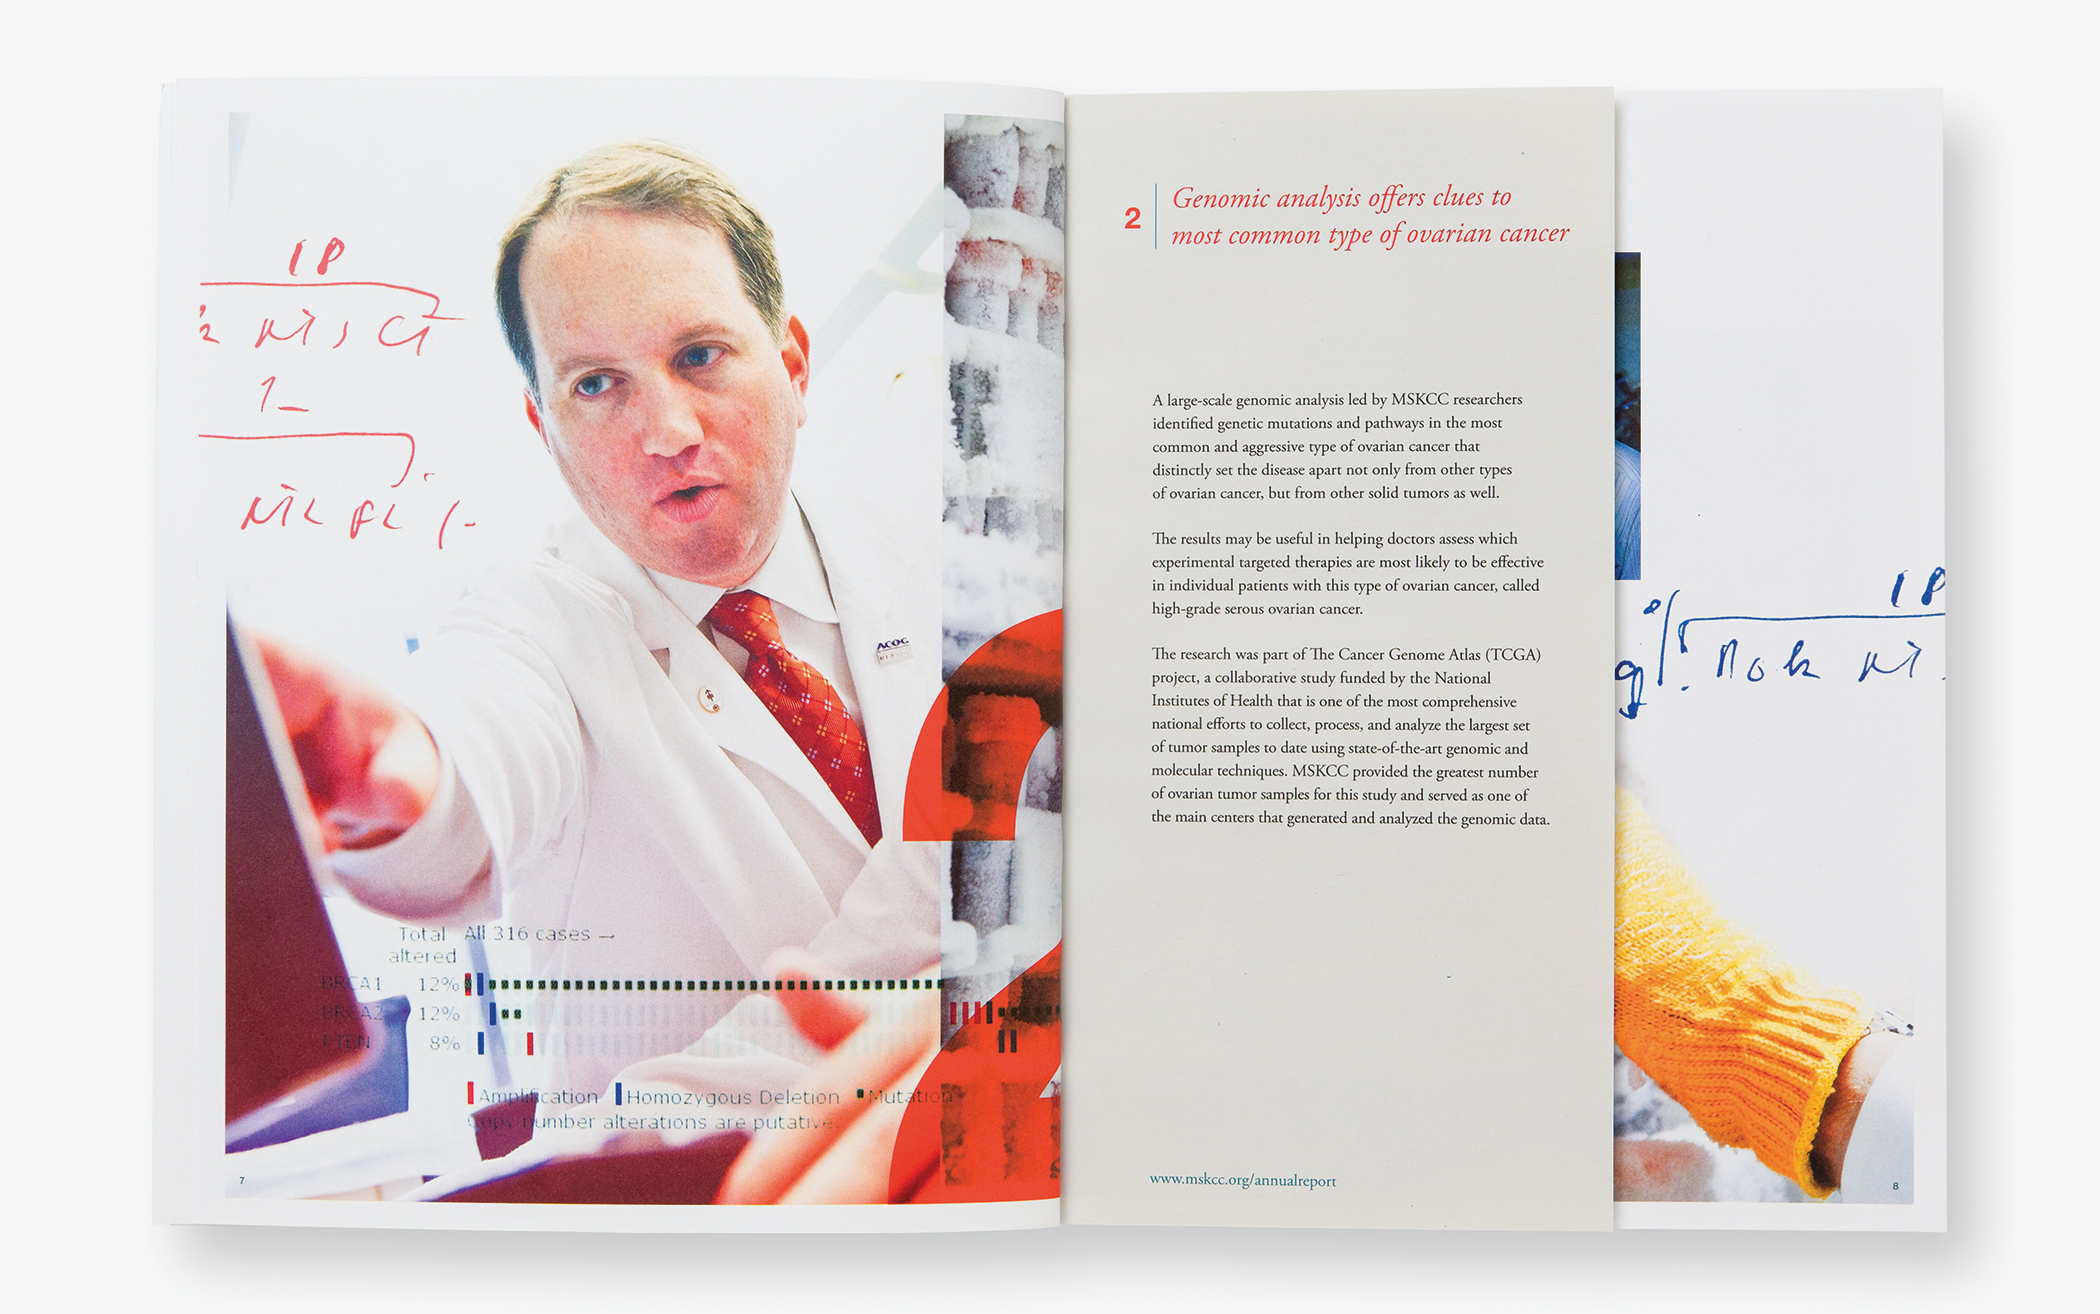 A page from the Memorial Sloan-Kettering 2011 annual report about genomic analysis shows a doctor at a whiteboard.